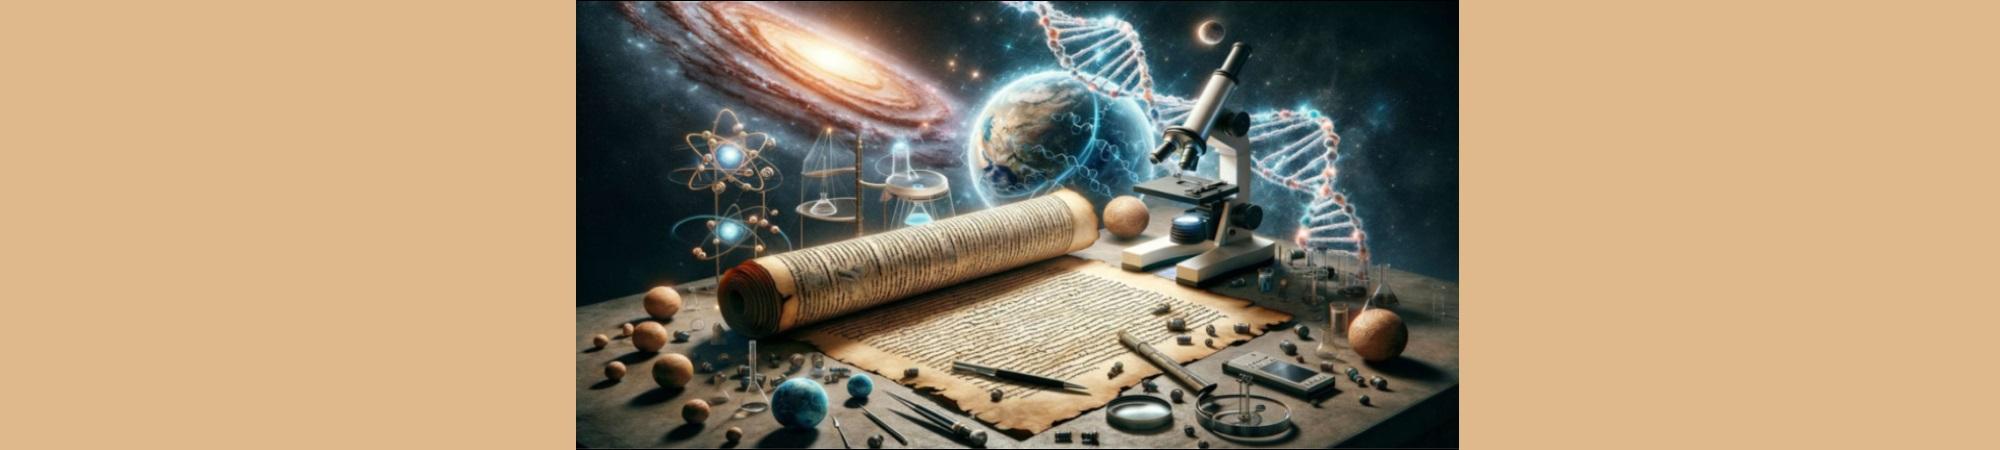 Complex artistic image with microscope, Bible, planets galaxies, DNA, more.